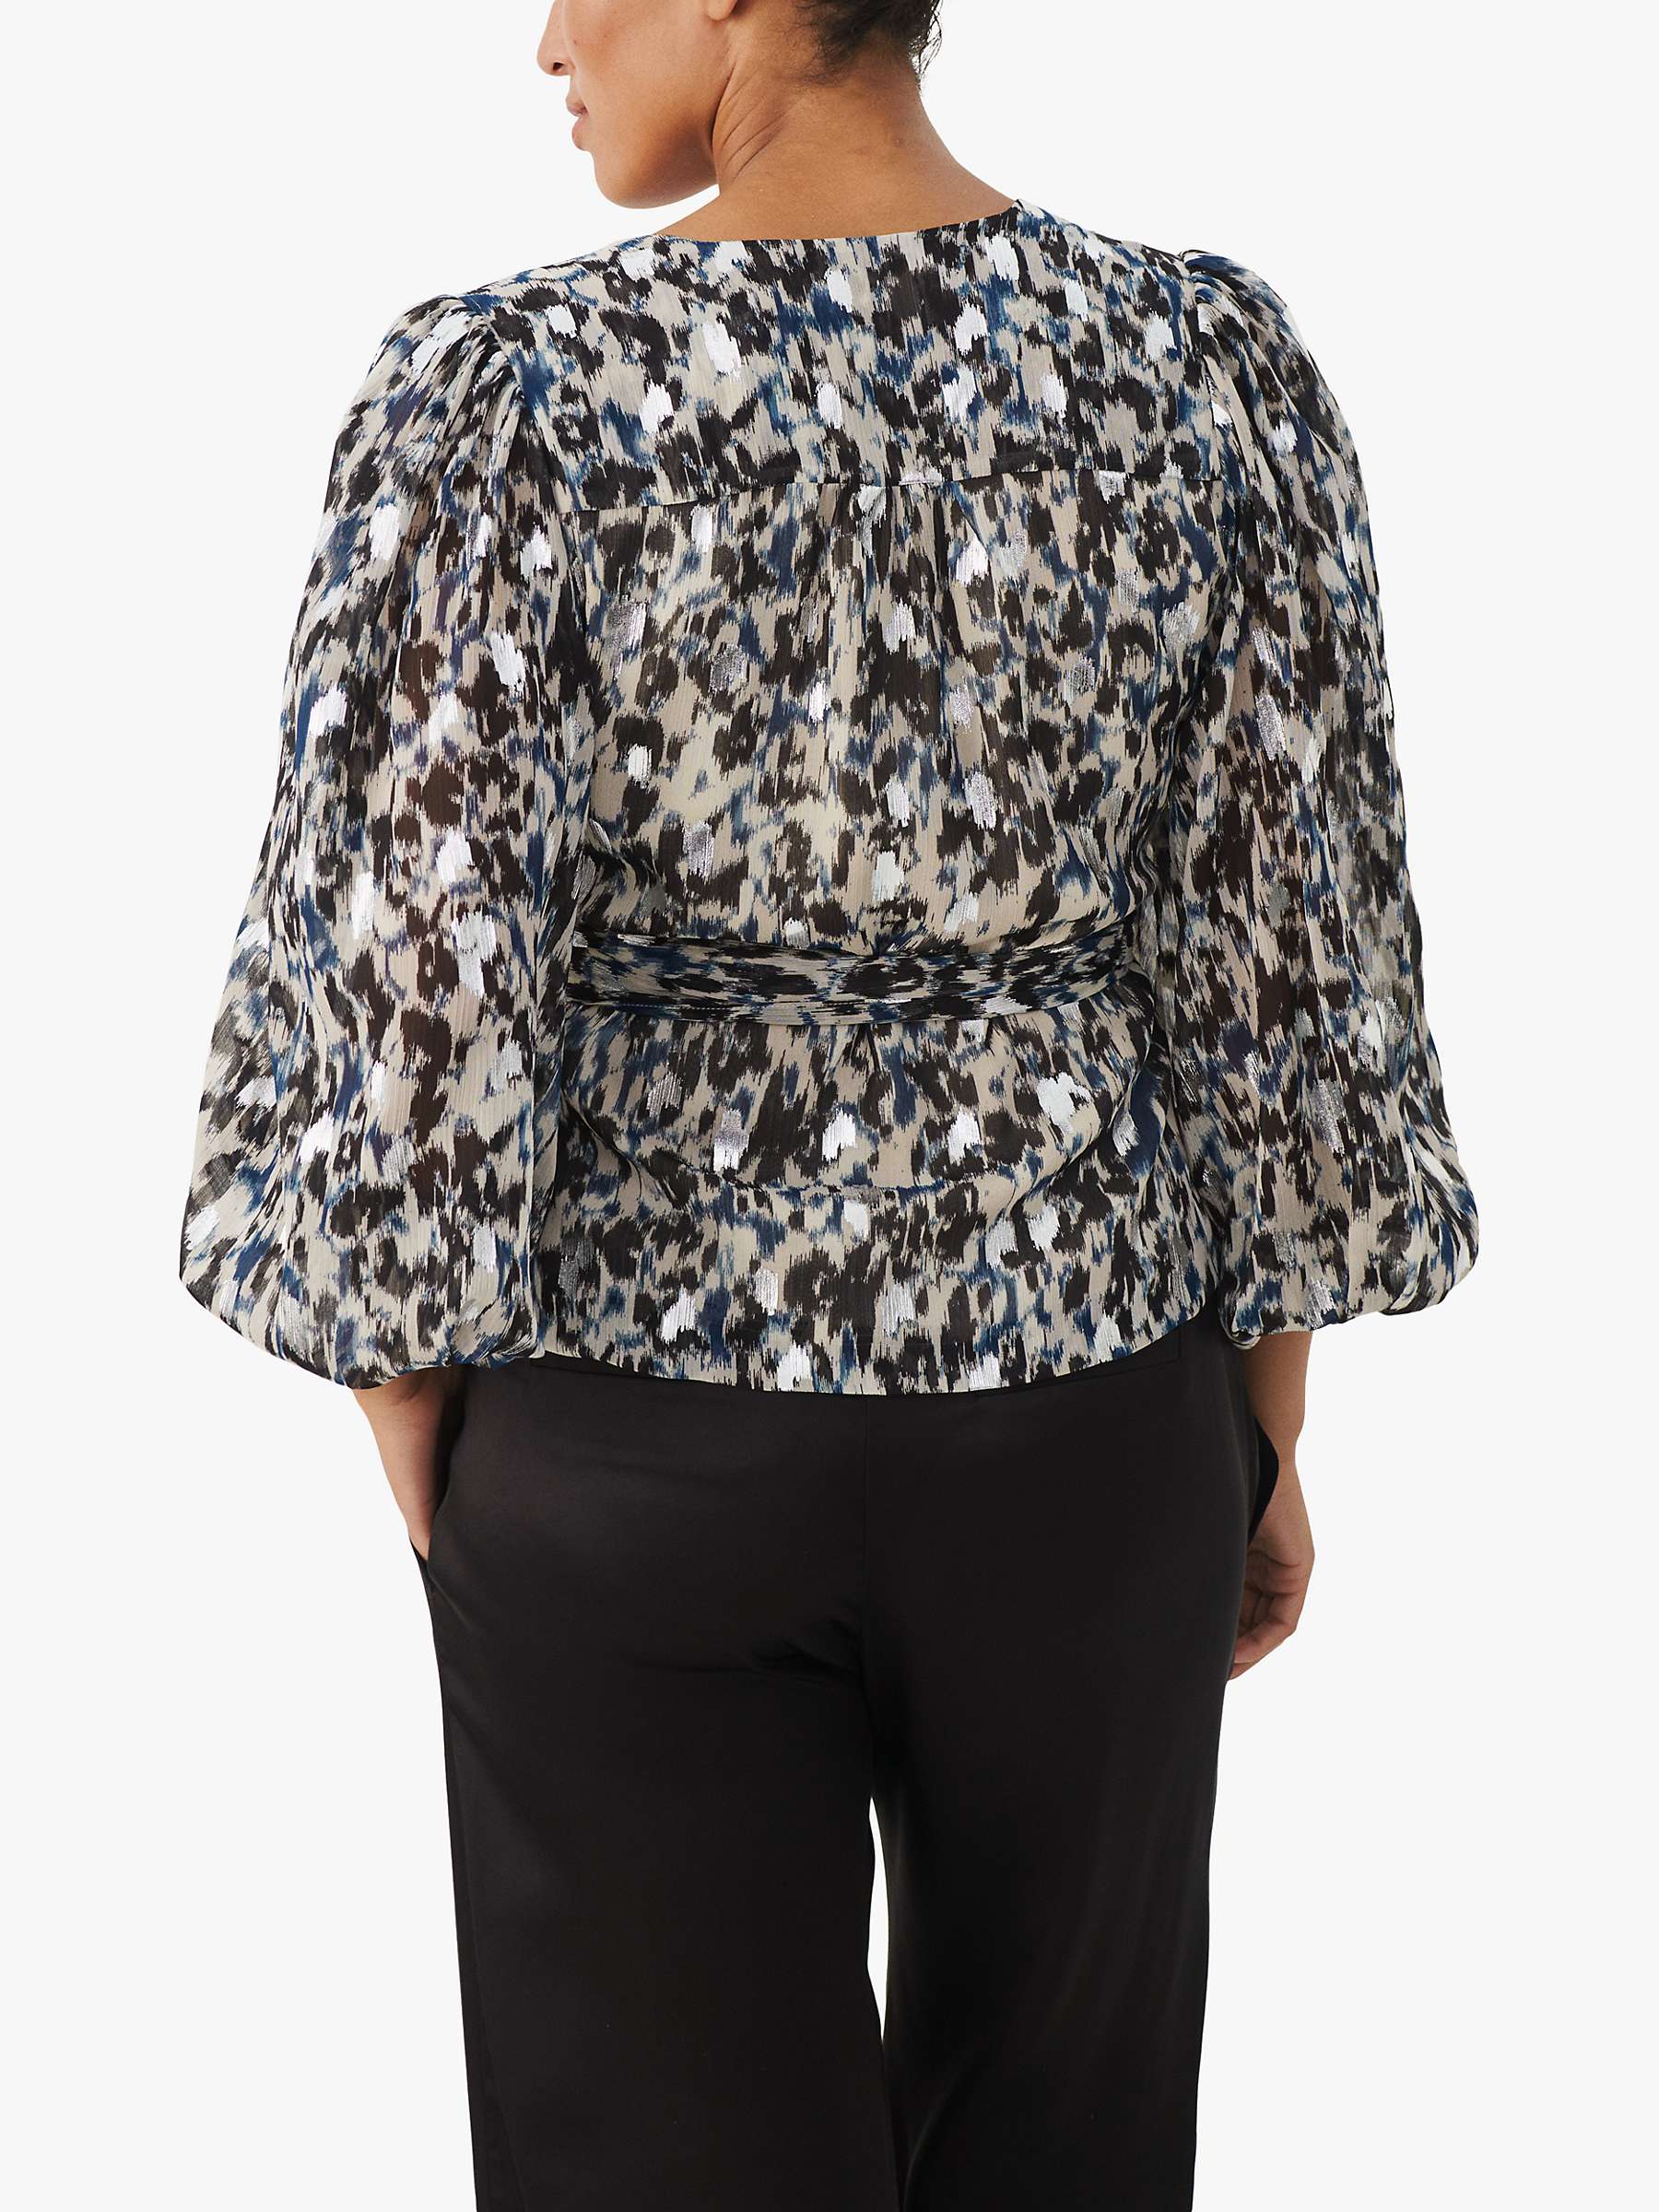 Buy Part Two Tria Regular Slim Fit Blouse, Texture Print Silver Online at johnlewis.com